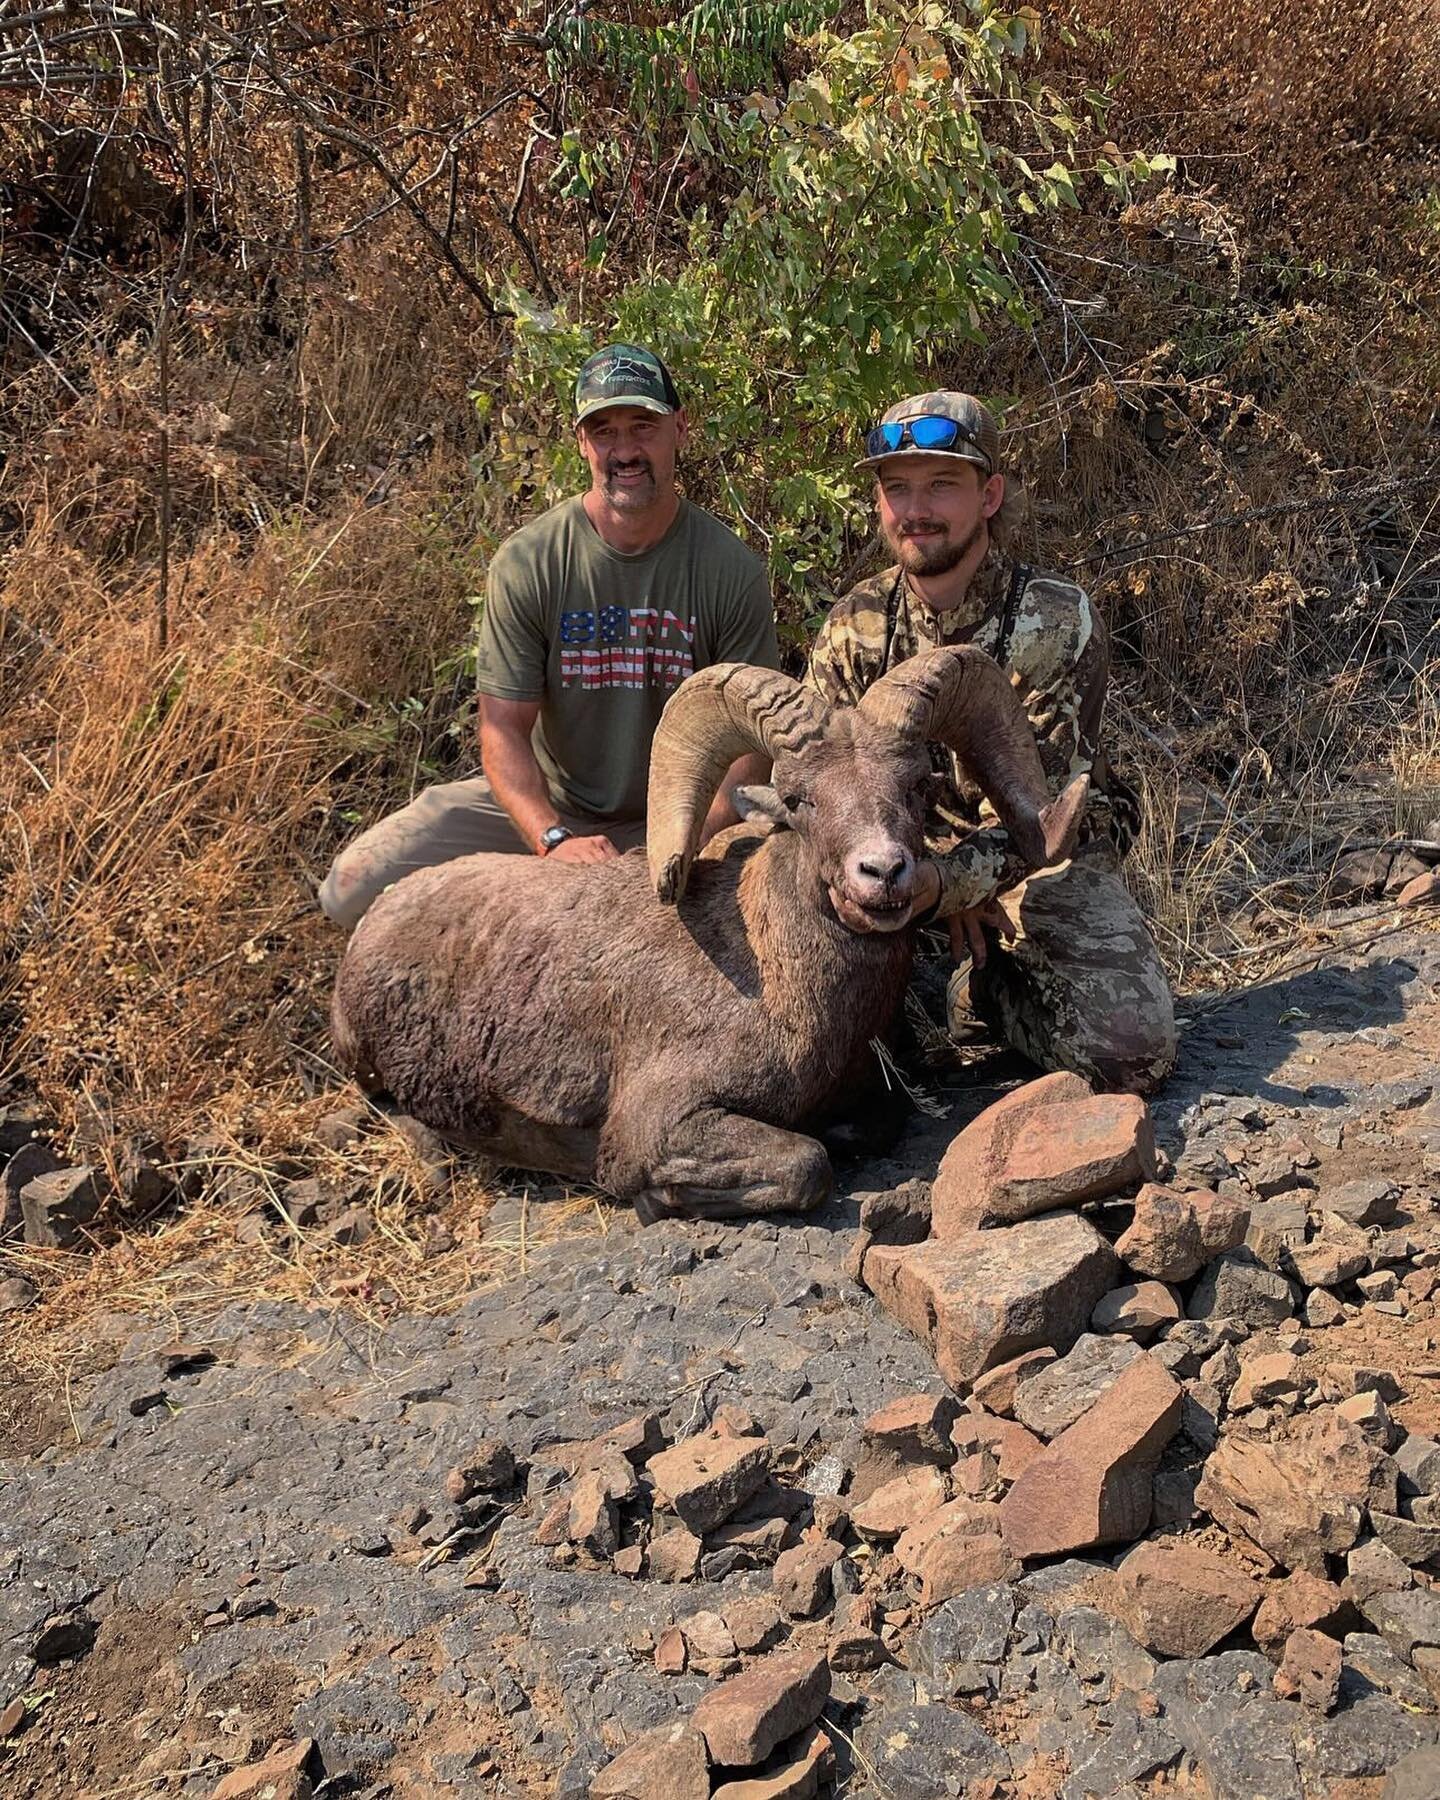 Hunter Johnson @huntdog36 was successful on his west deschutes ram tag for 2022 season. This ram is an amazing representation of the great California bighorns we have in Oregon! Great job Hunter and congratulations!